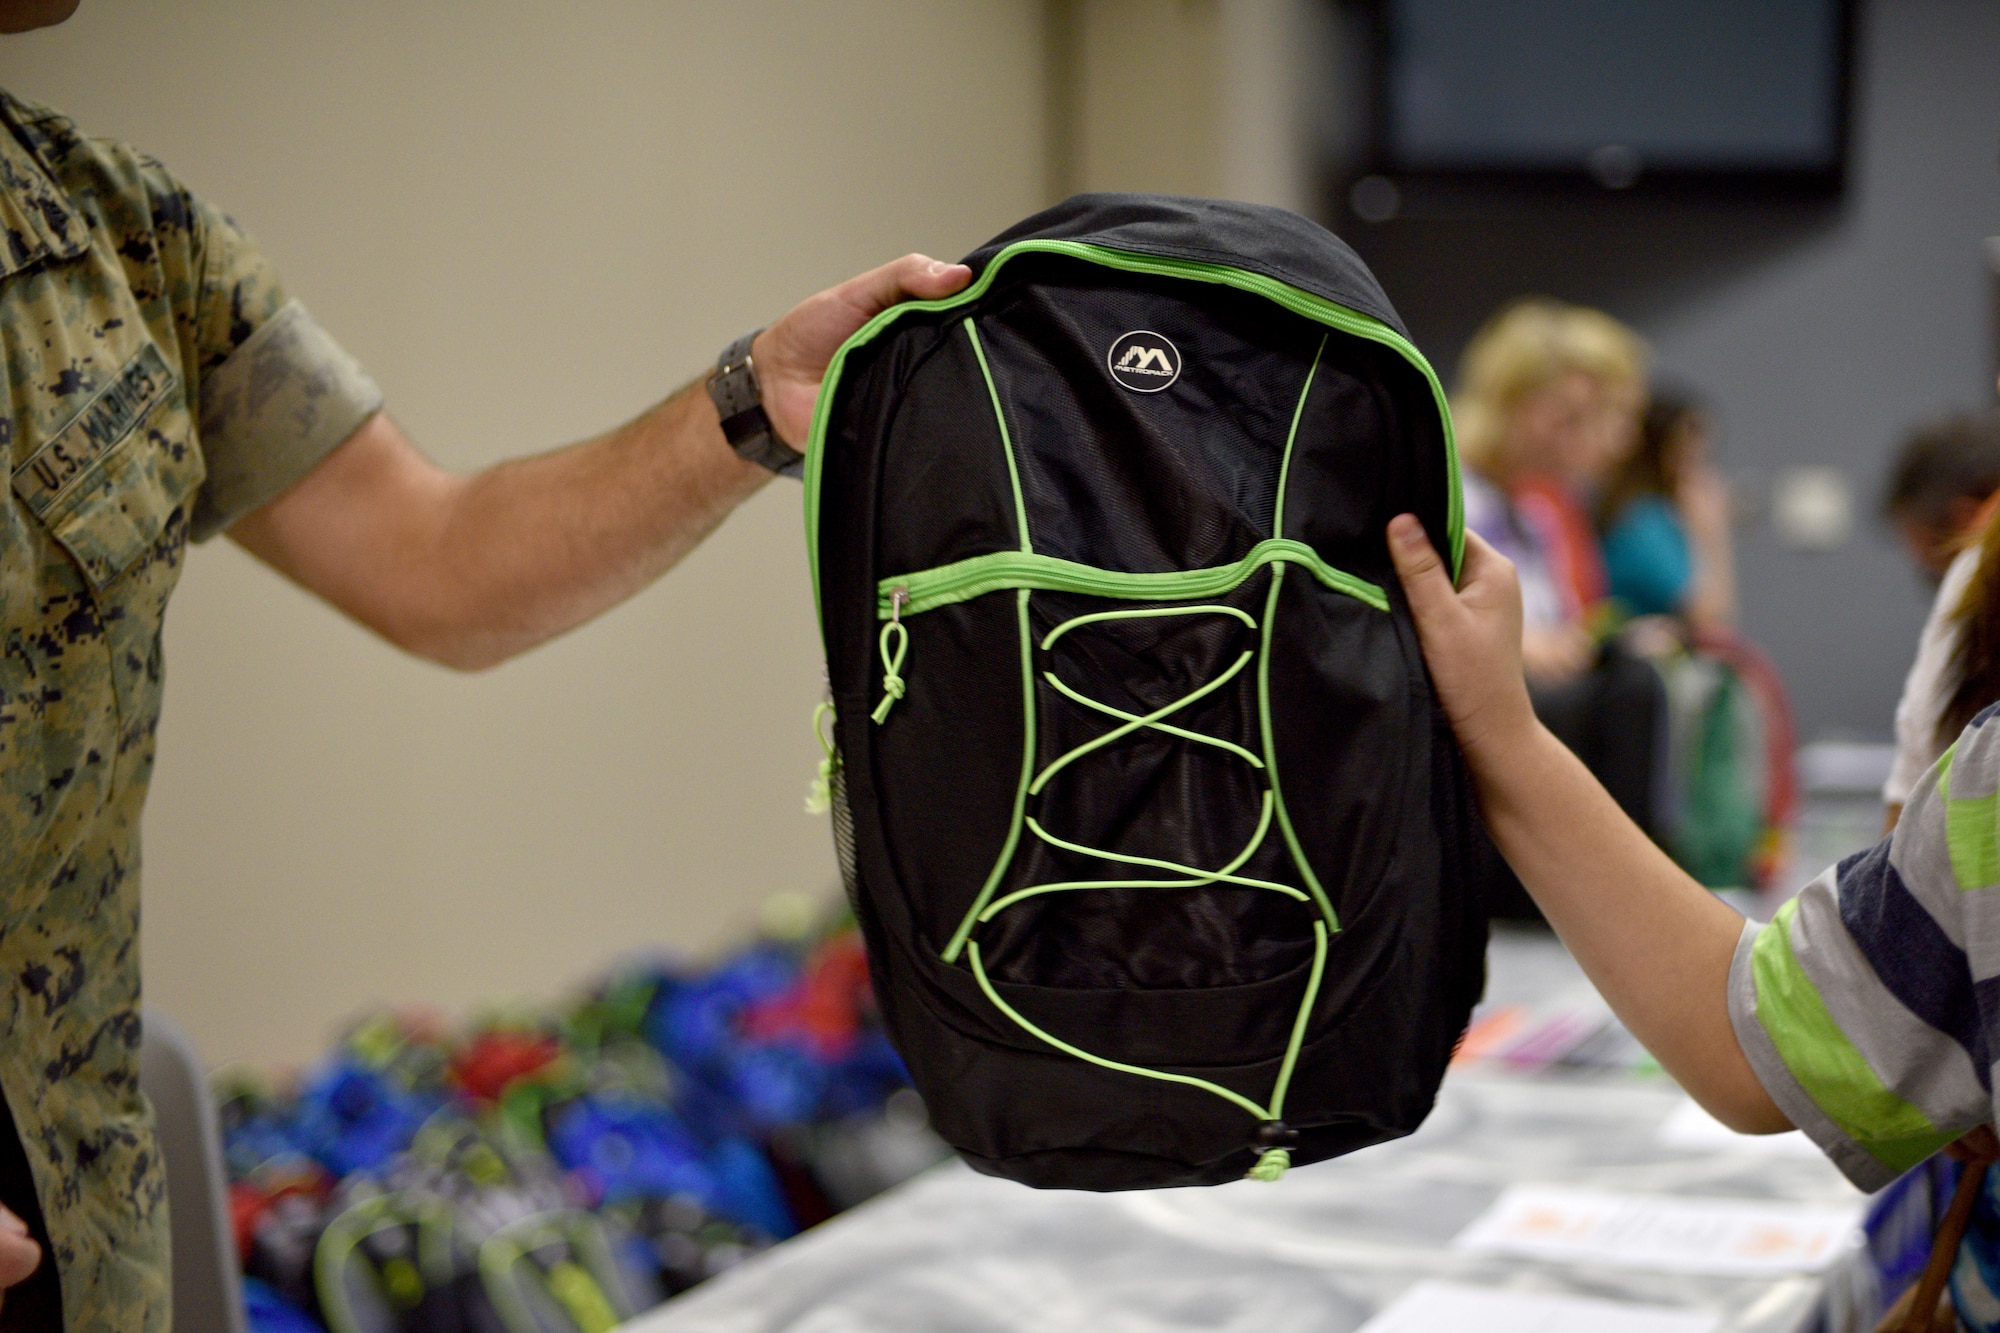 asp
U.S. Marine Sgt. Nathen Gruden, 312th Training Squadron instructor, gives a free backpack full of school supplies to a child during Operation Back to School in the Event Center on Goodfellow Air Force Base, Texas, Aug. 10, 2017. The backpack included pencils, pens, notebooks and crayons. (U.S. Air Force photo by Airman 1st Class Randall Moose/Released)